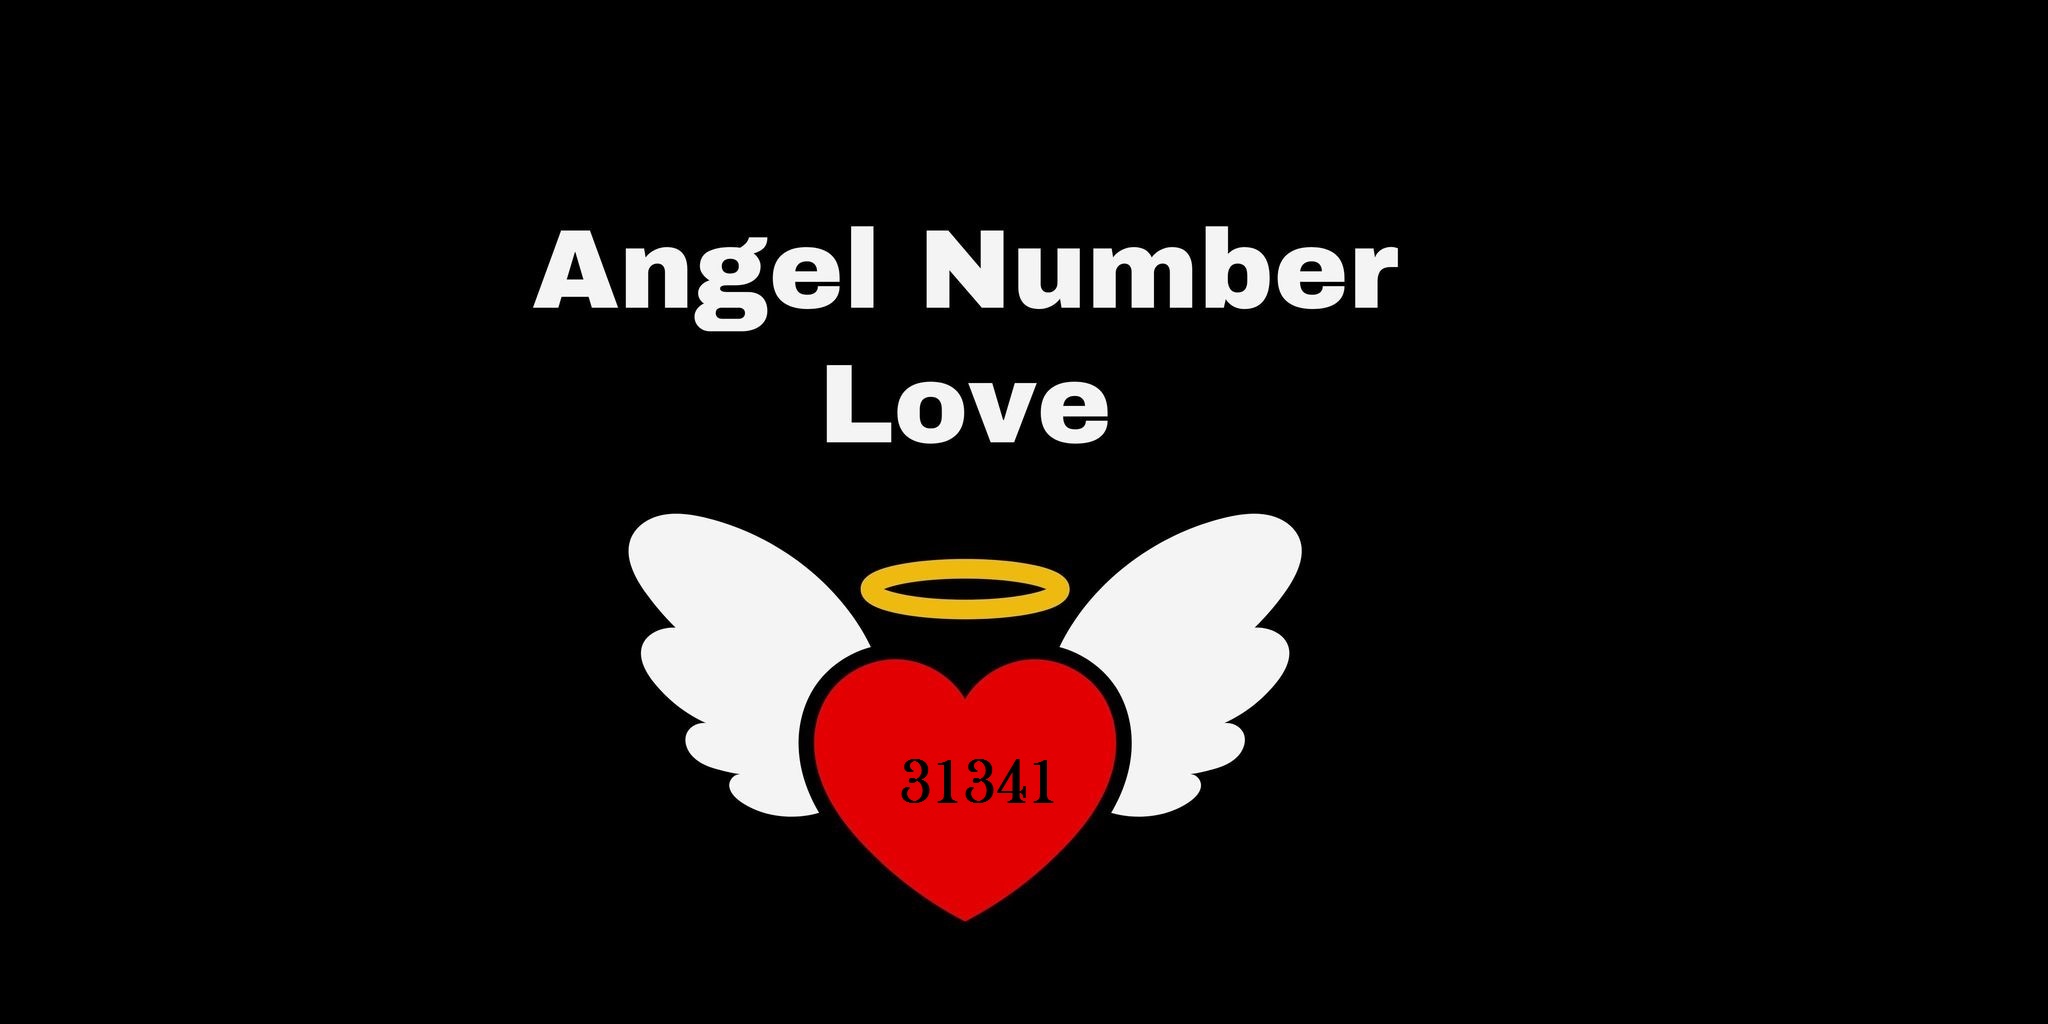 31341 Angel Number Meaning In Love